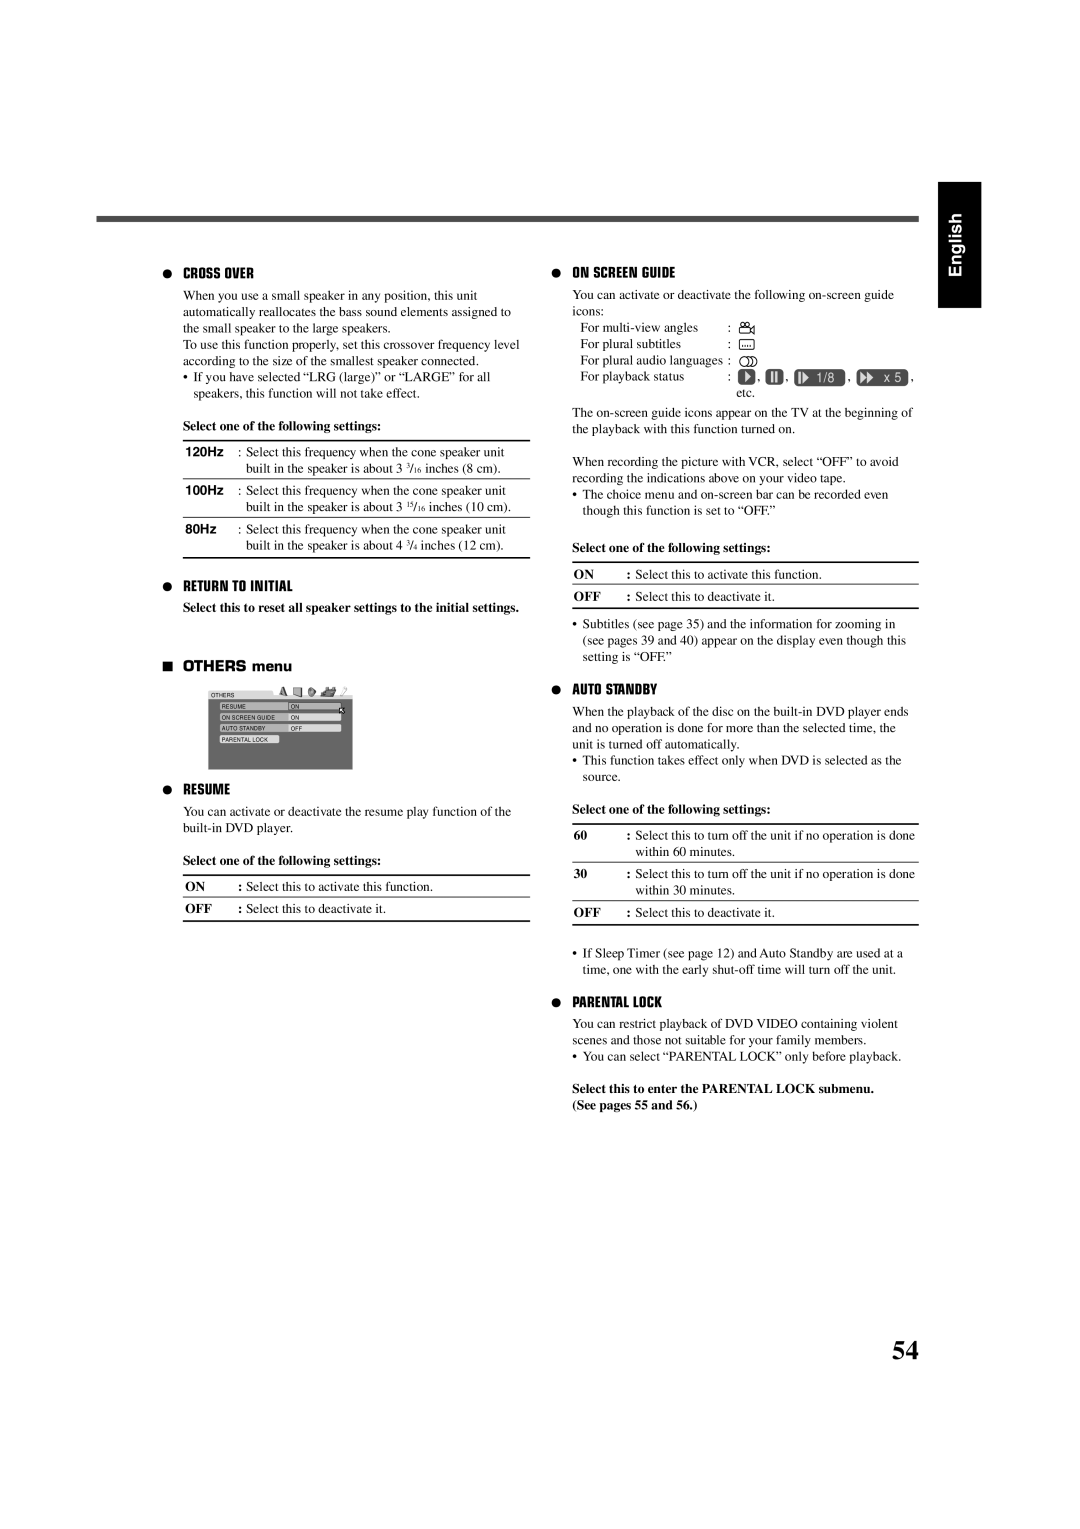 JVC RX-DV5SL manual English, ¶Cross Over, ¶Return To Initial, 7OTHERS menu, ¶Resume, ¶On Screen Guide, ¶Auto Standby 